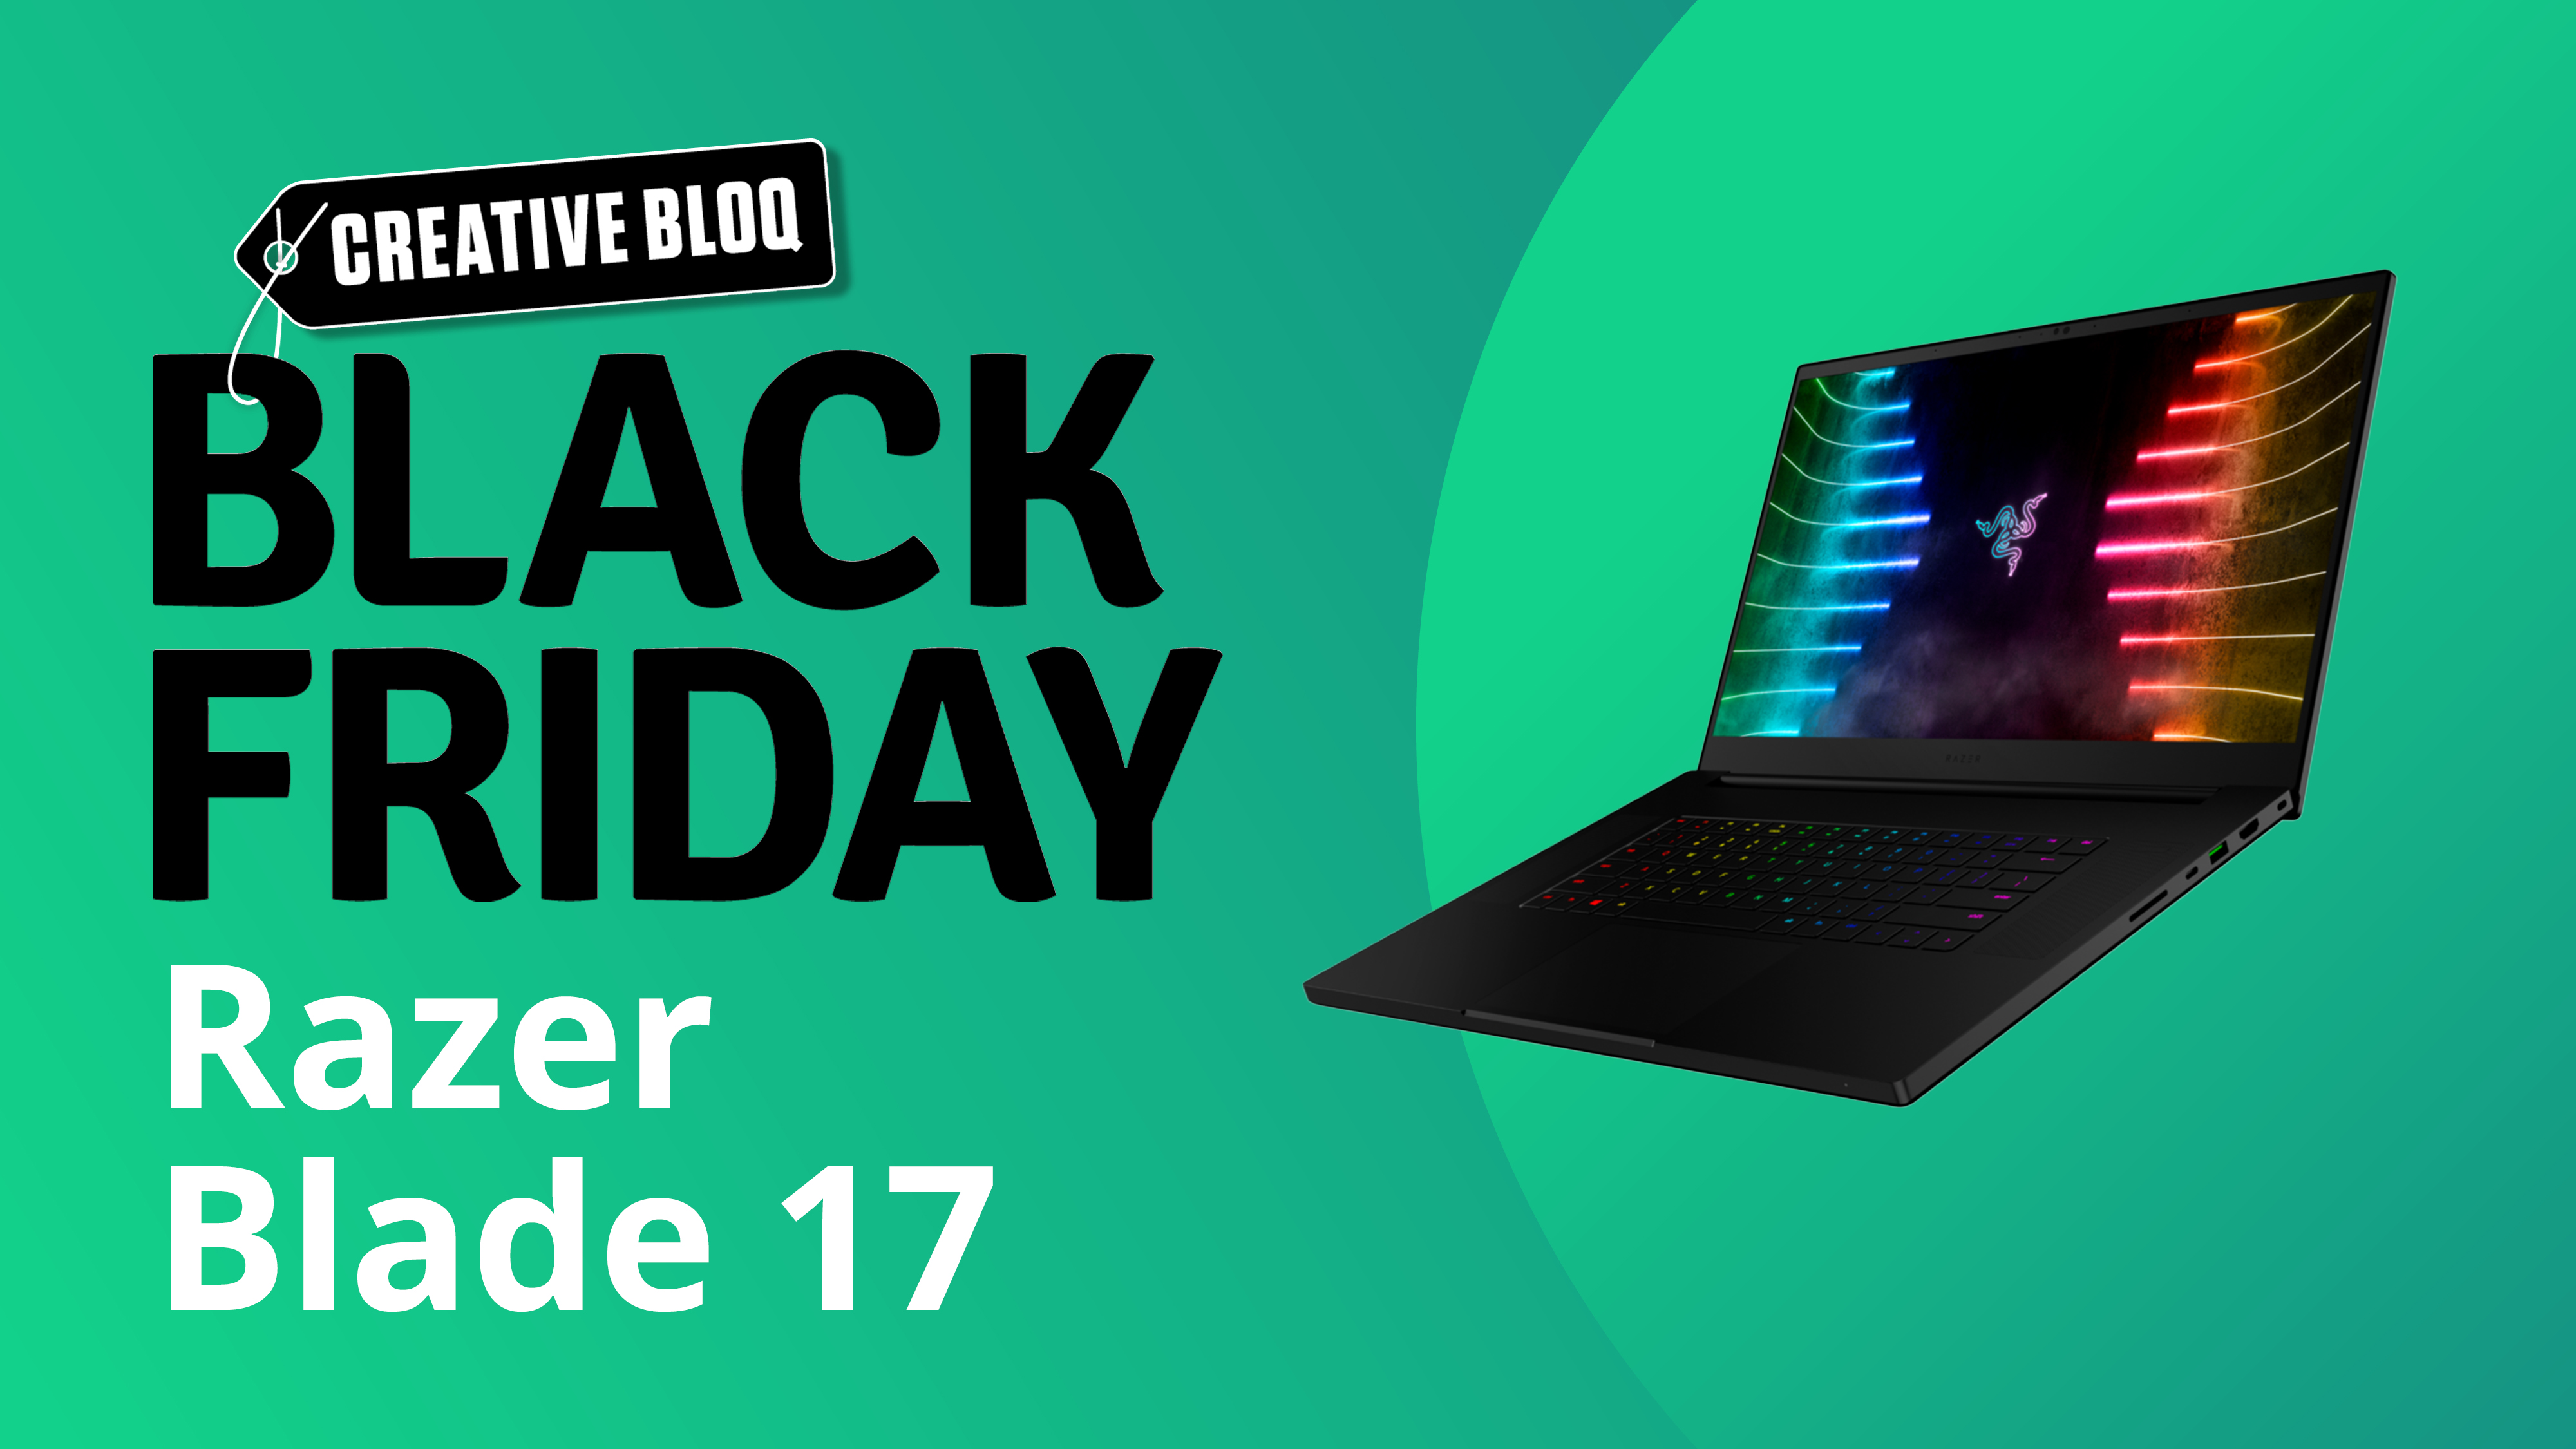 A Razer Black Friday deals image, with a Razer Blade 17 on a green background